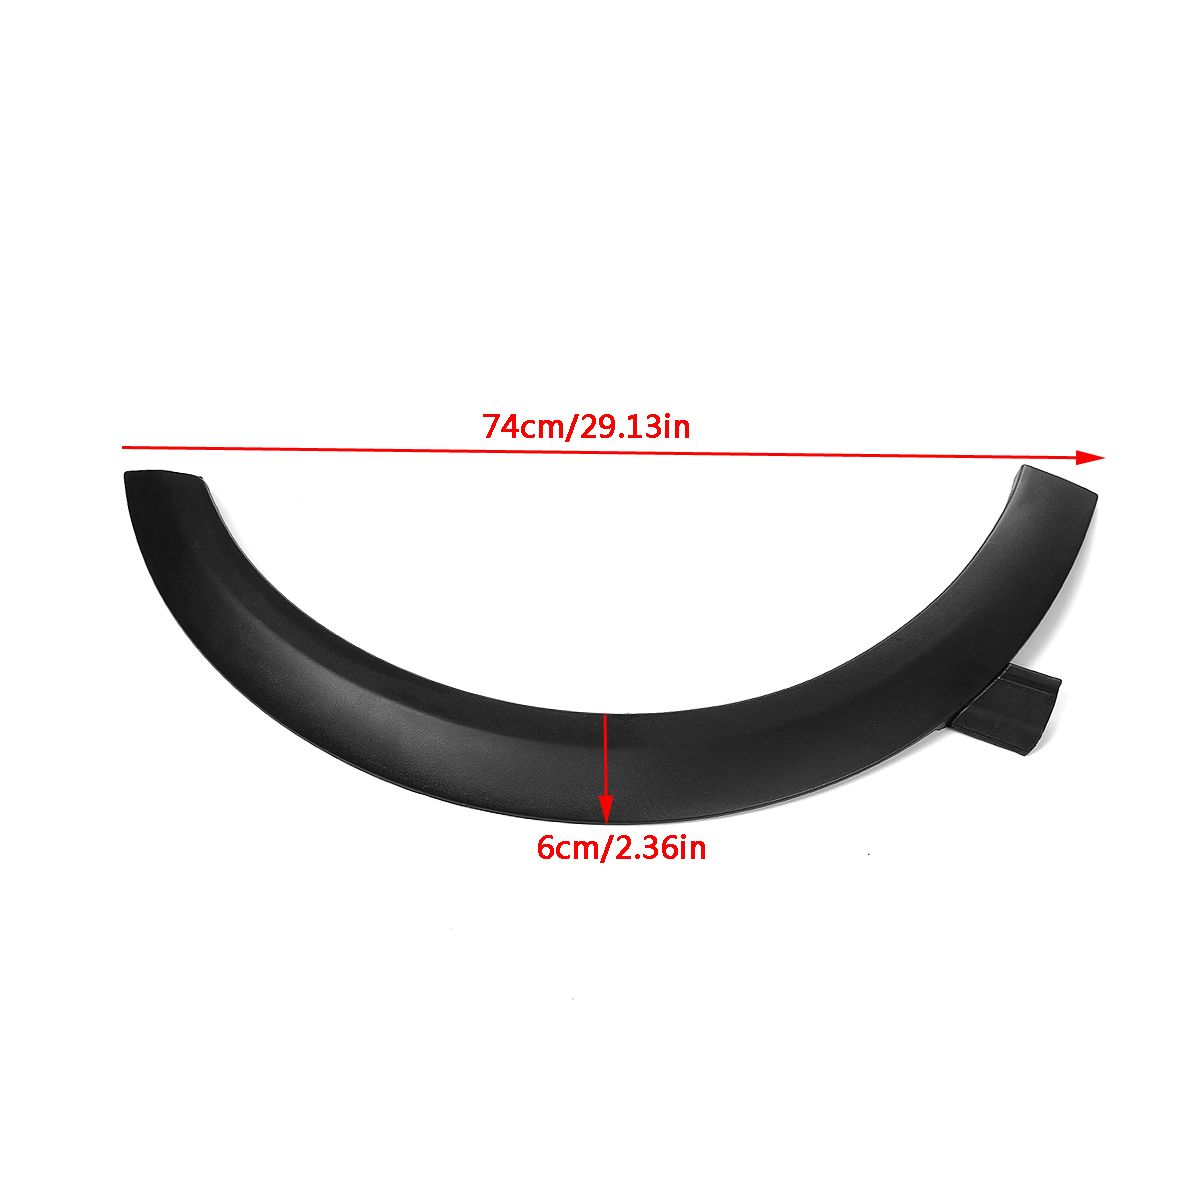 4PCS-Front-Rear-Fender-Flares-Wheel-Arches-Protector-For-VW-Golf-Jetta-Cabrio-MK3-1725983